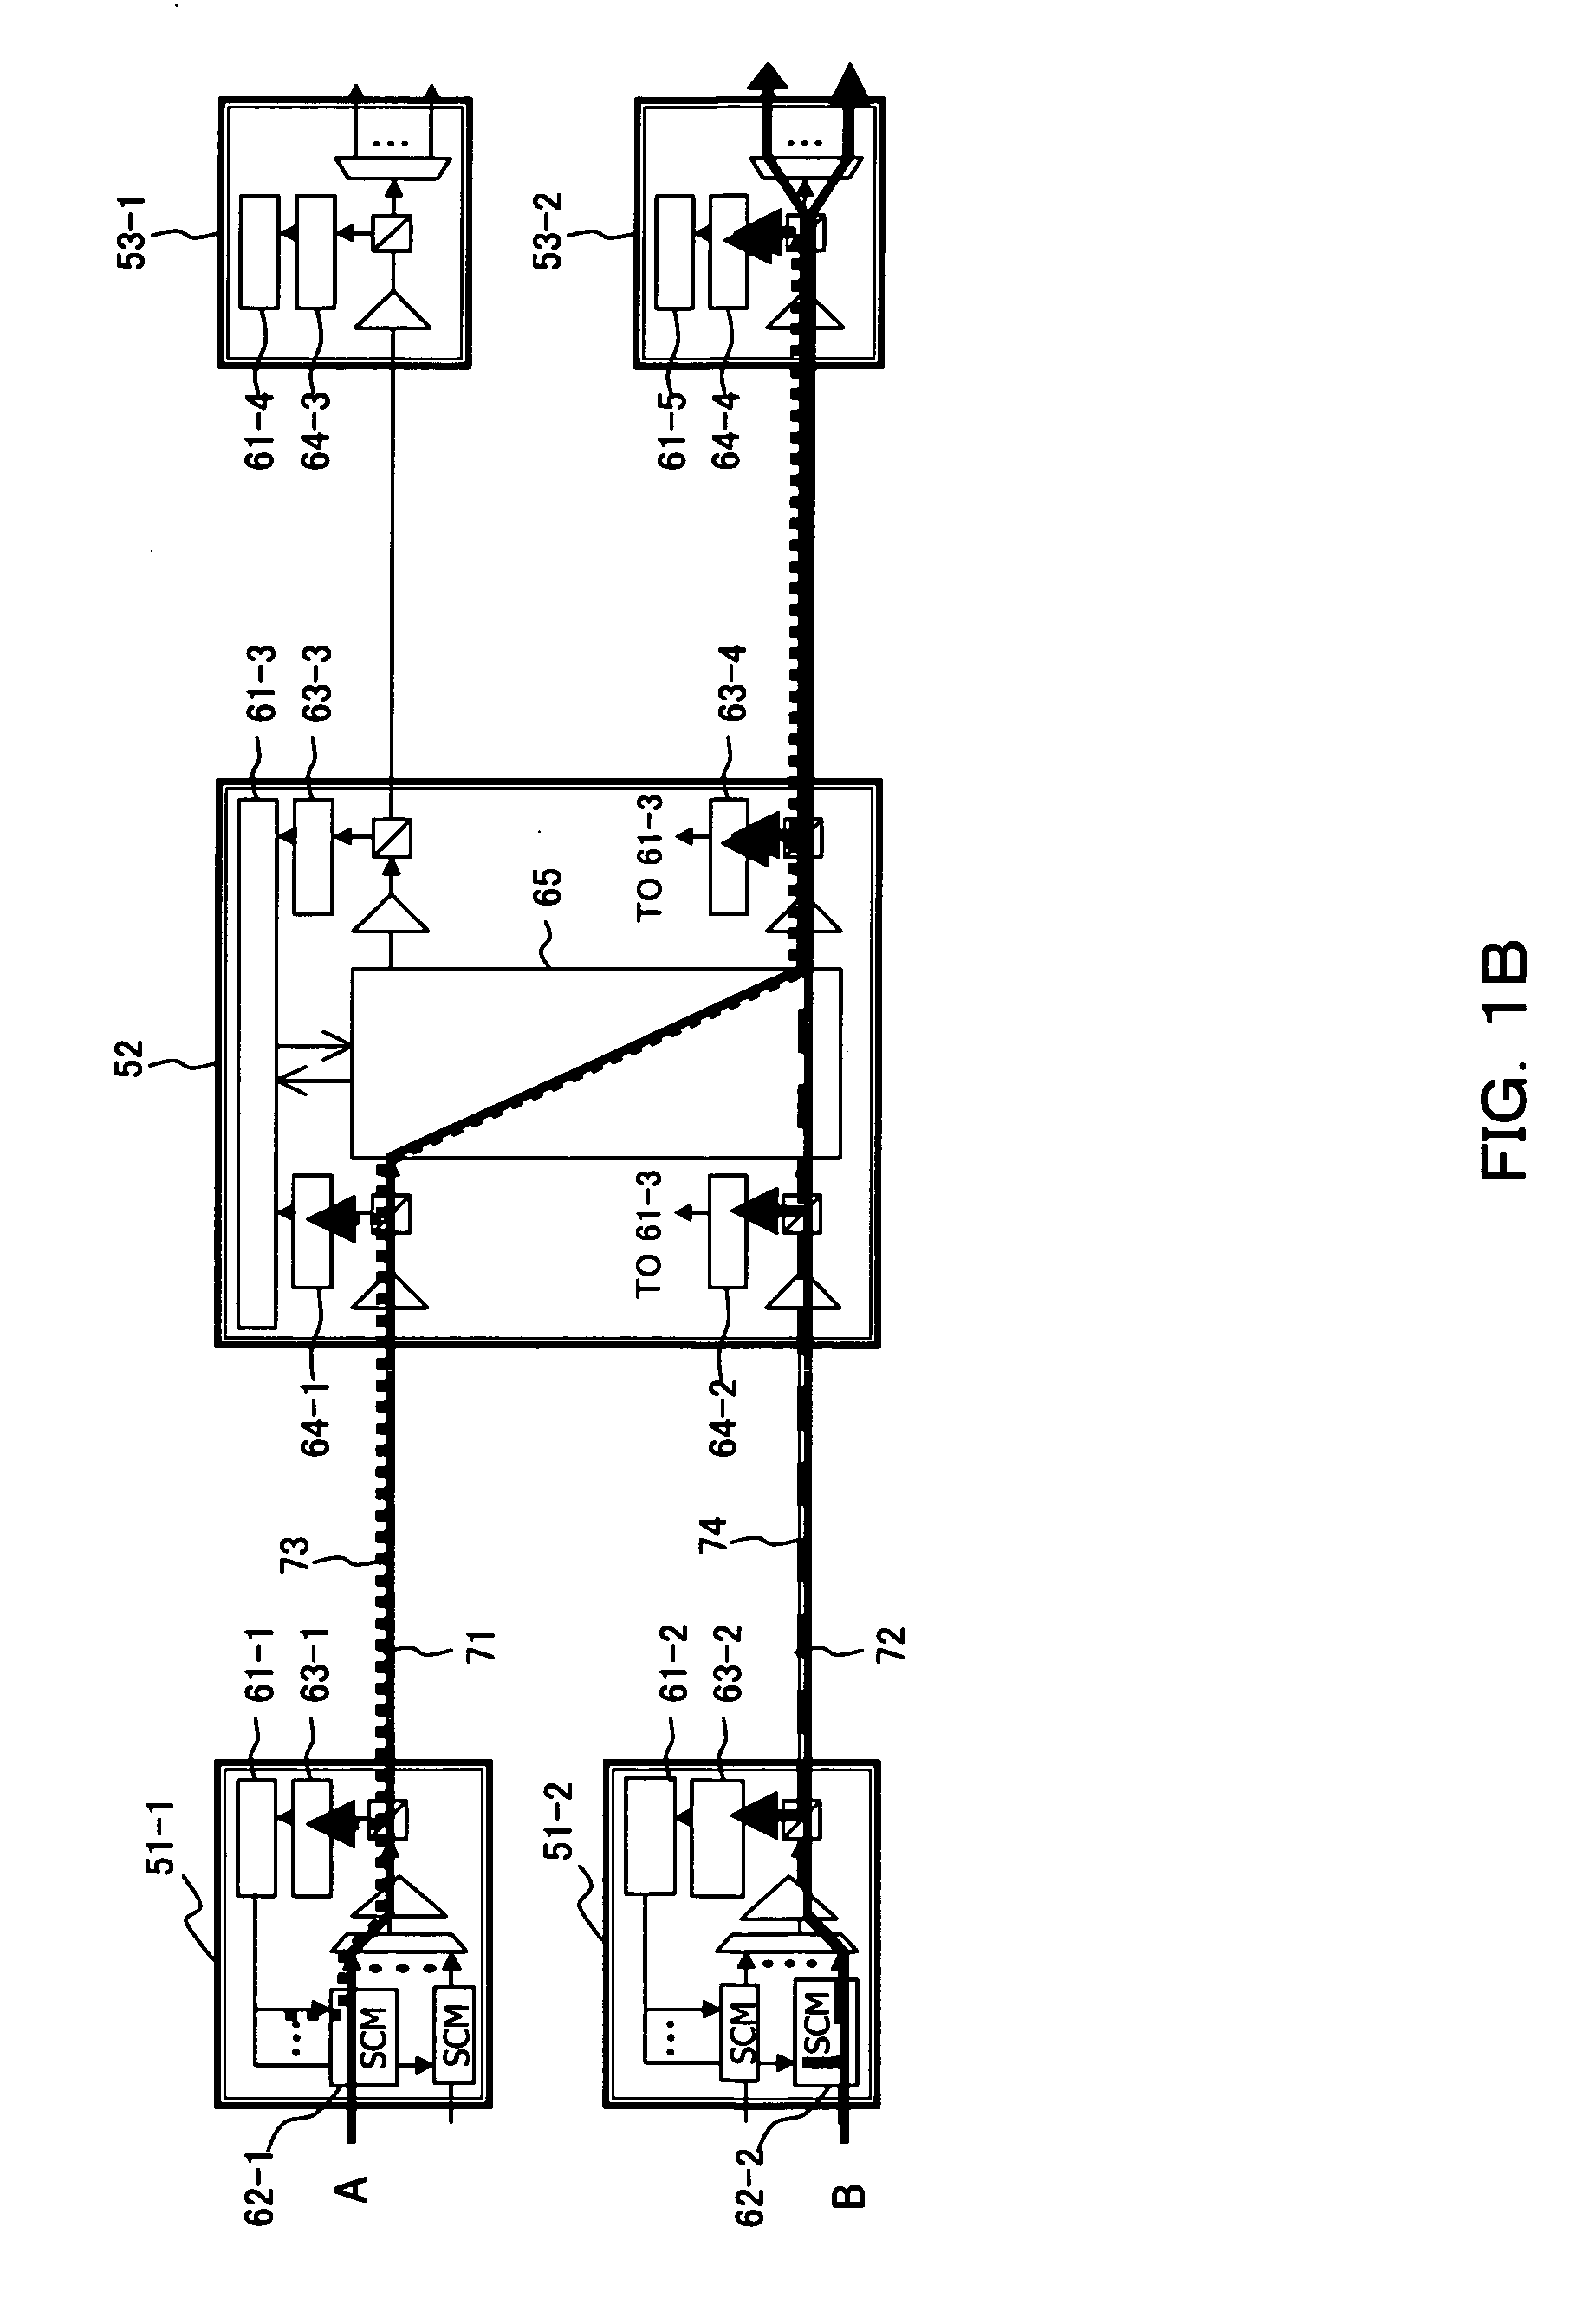 Node device for transfering supervisory control information in photonic network